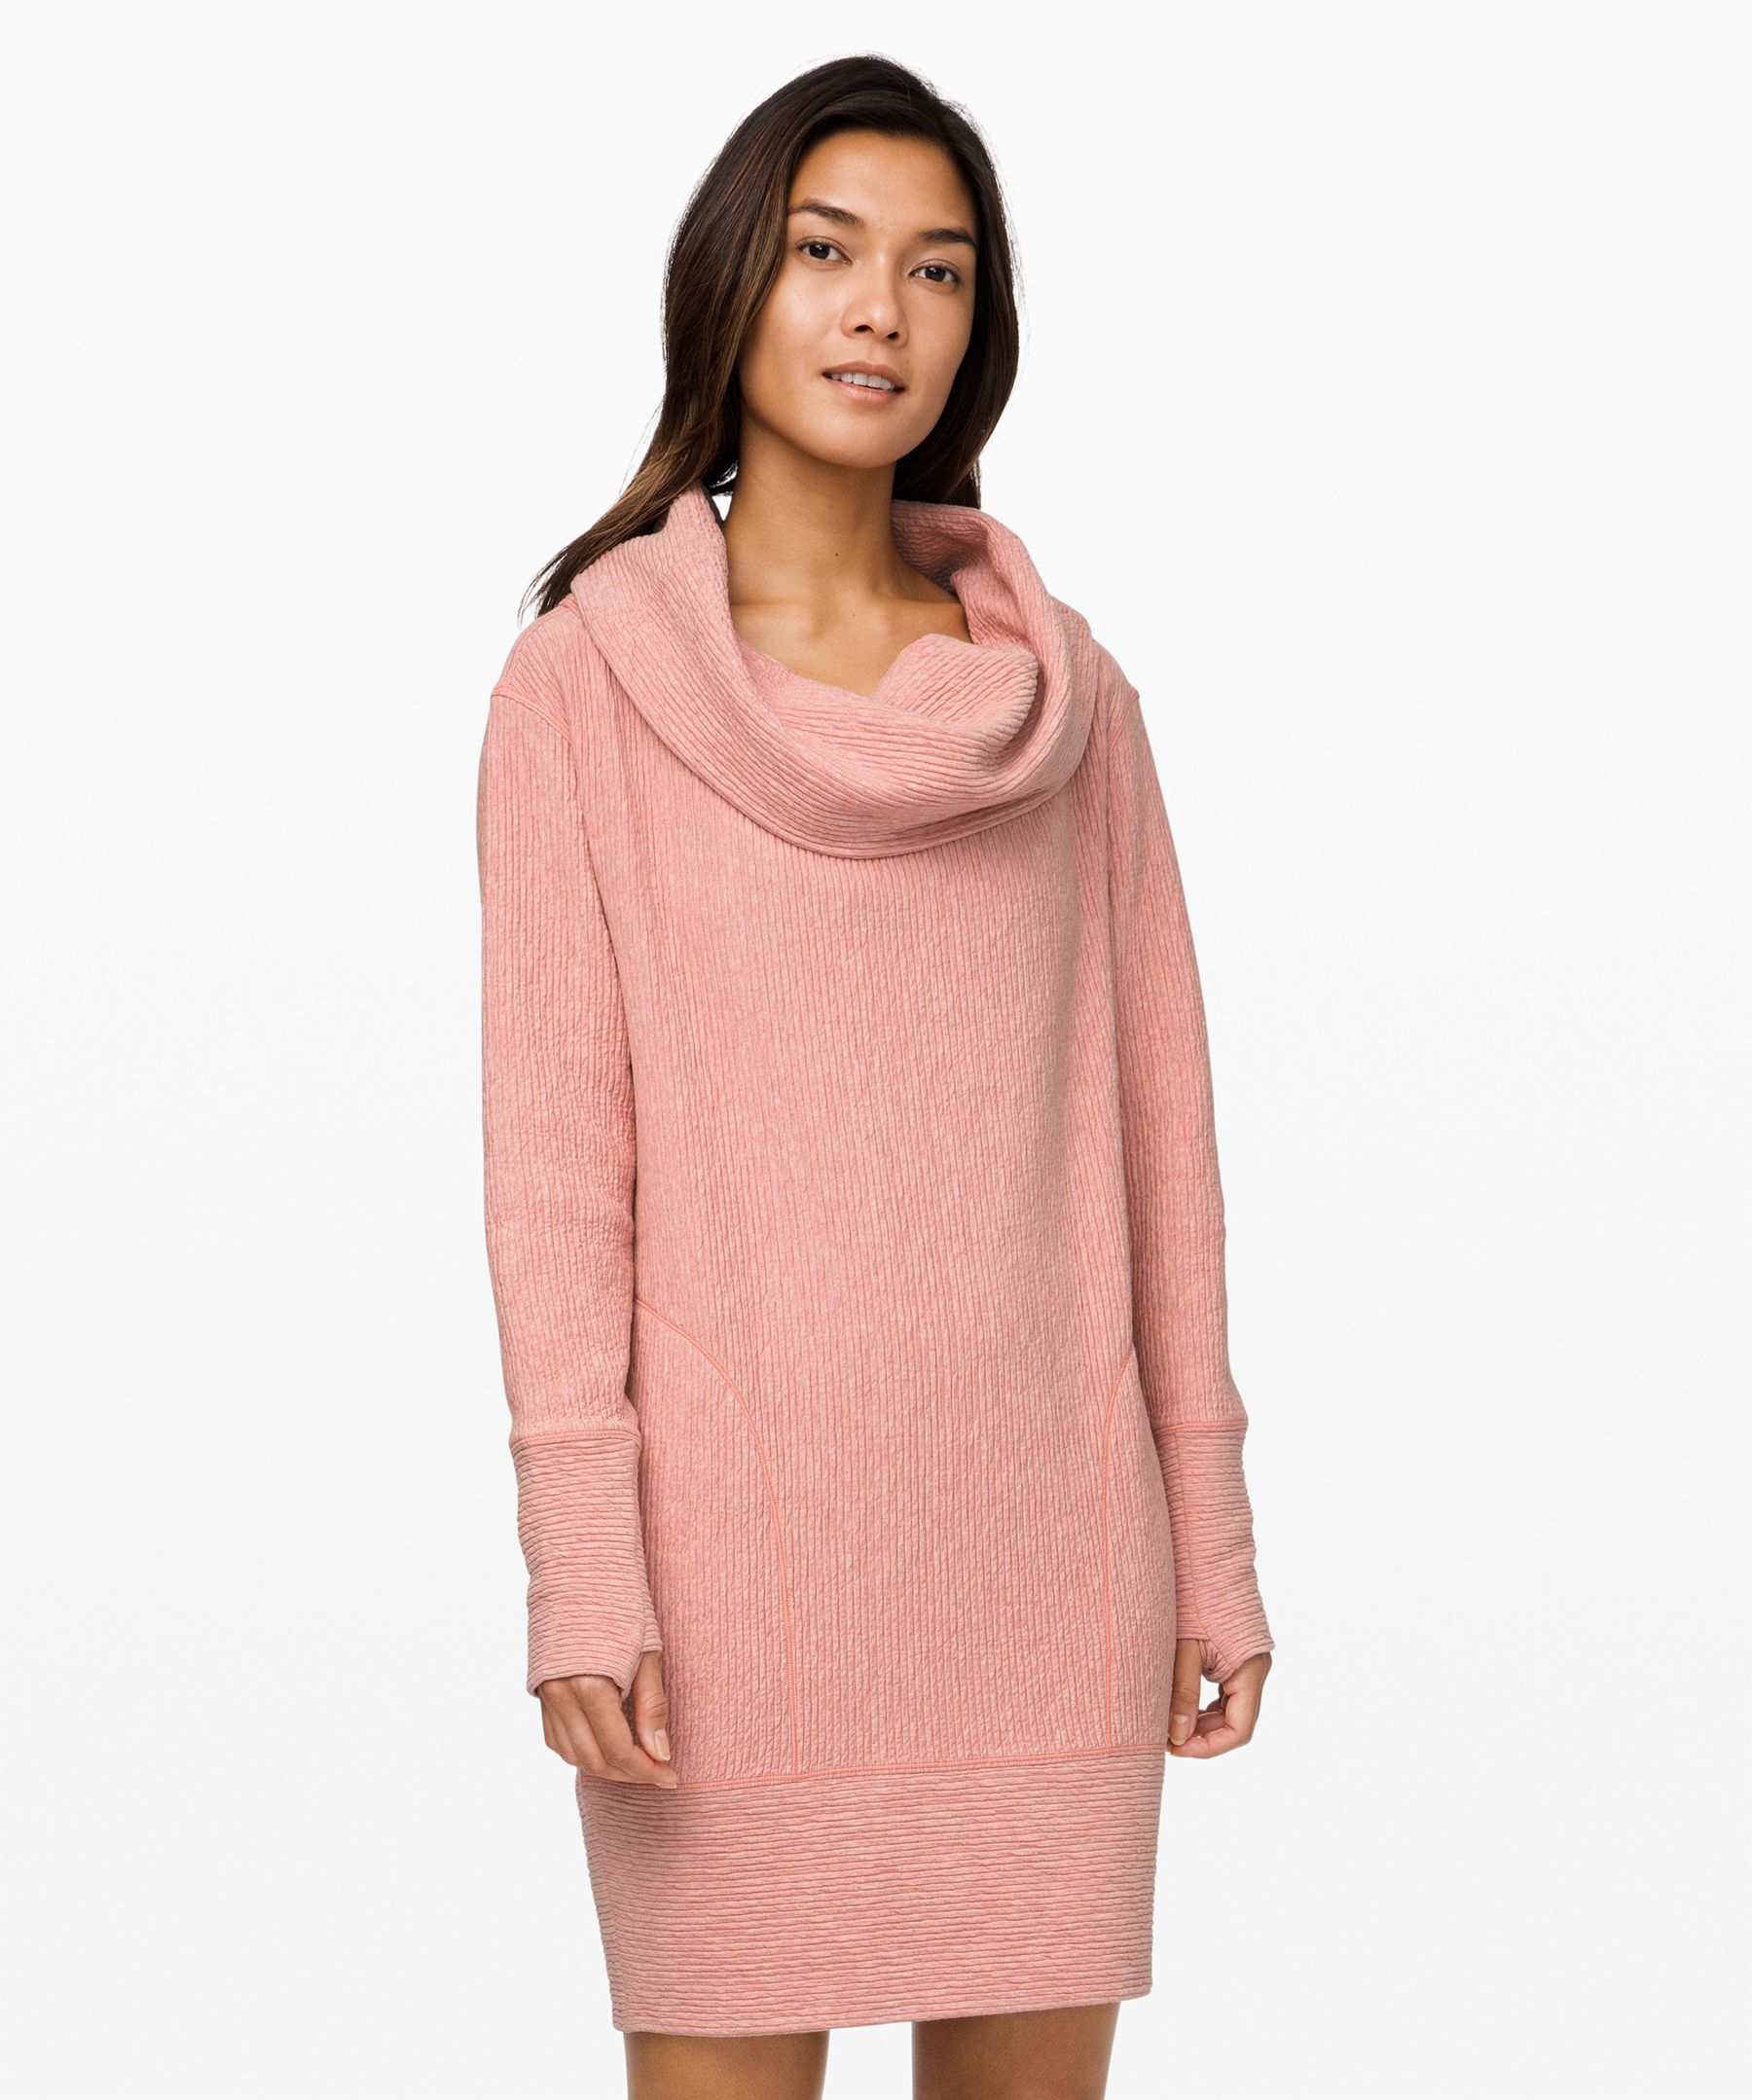 Lululemon Along The Way Dress In Heathered Copper Clay